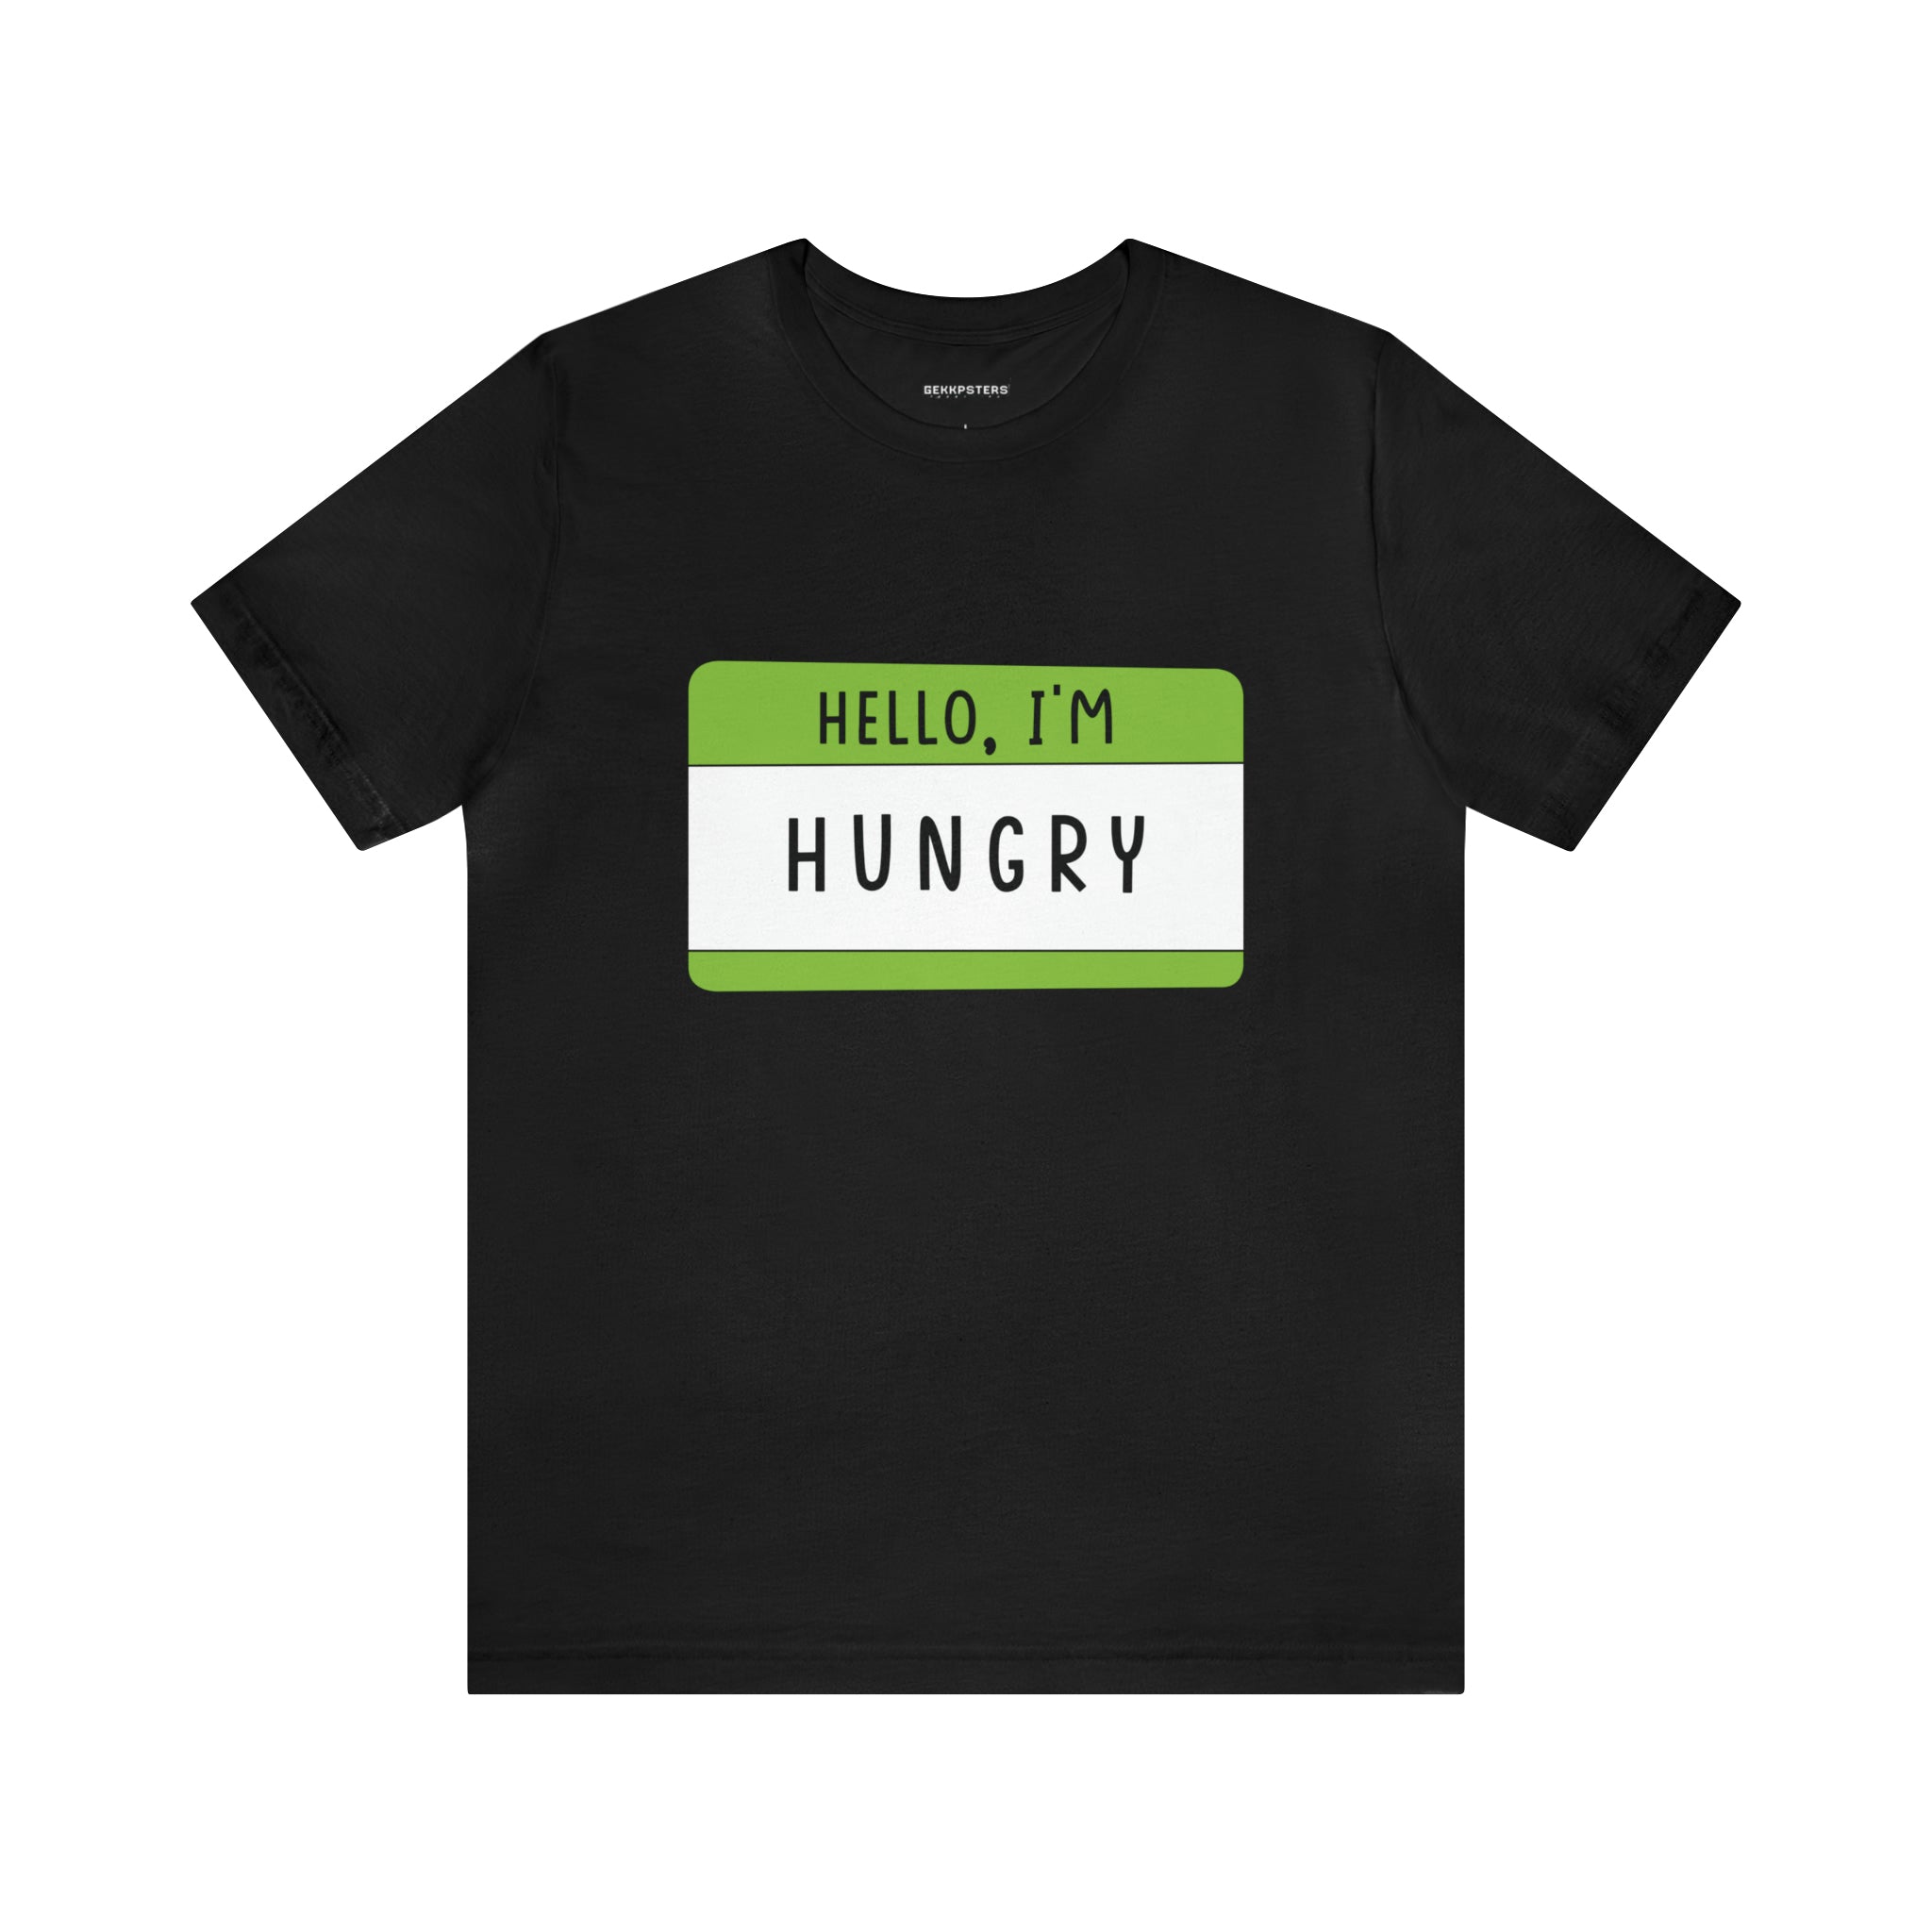 A black Hello, I'm Hungry T-Shirt is a fun way to express your hunger.